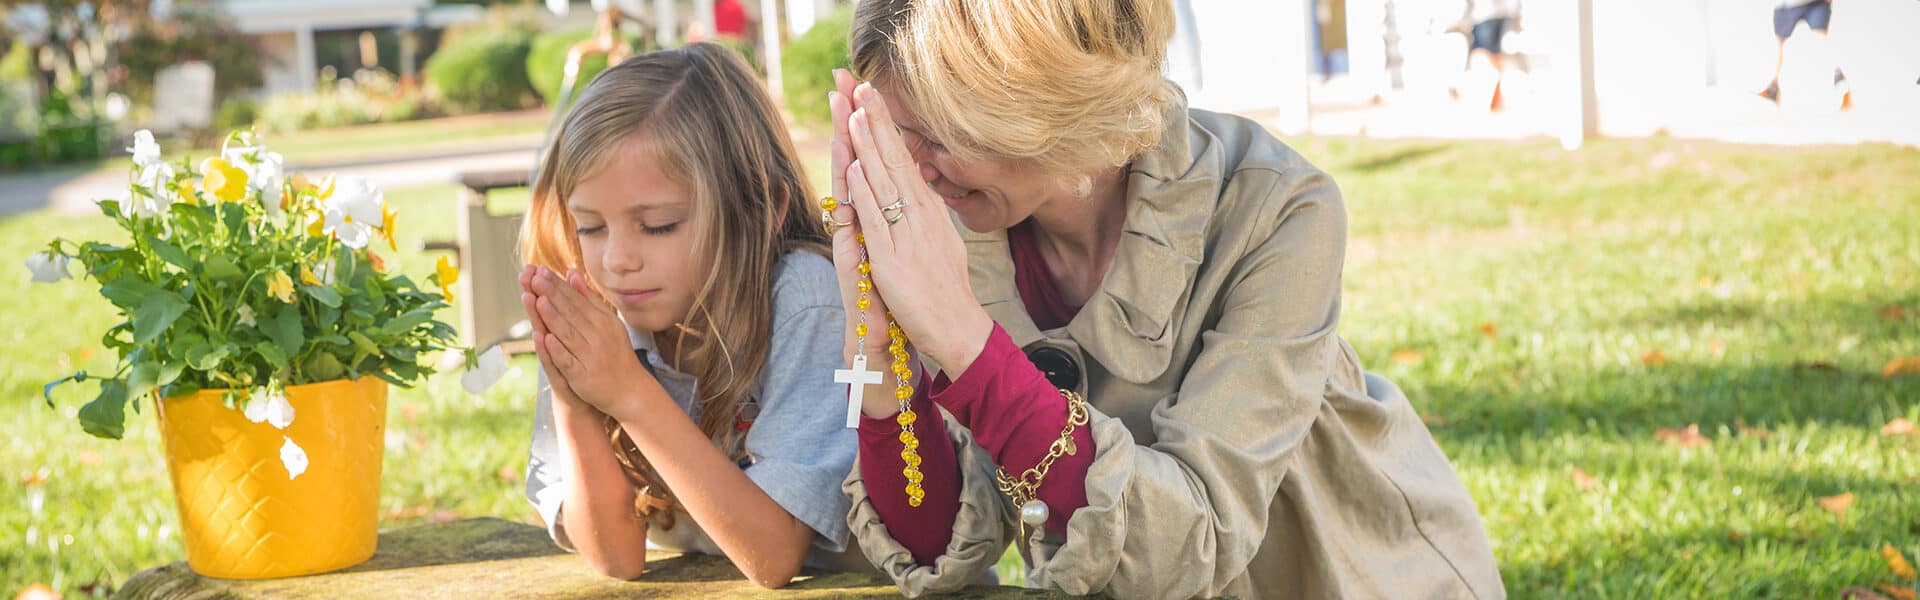 Student and teacher praying the Rosary together